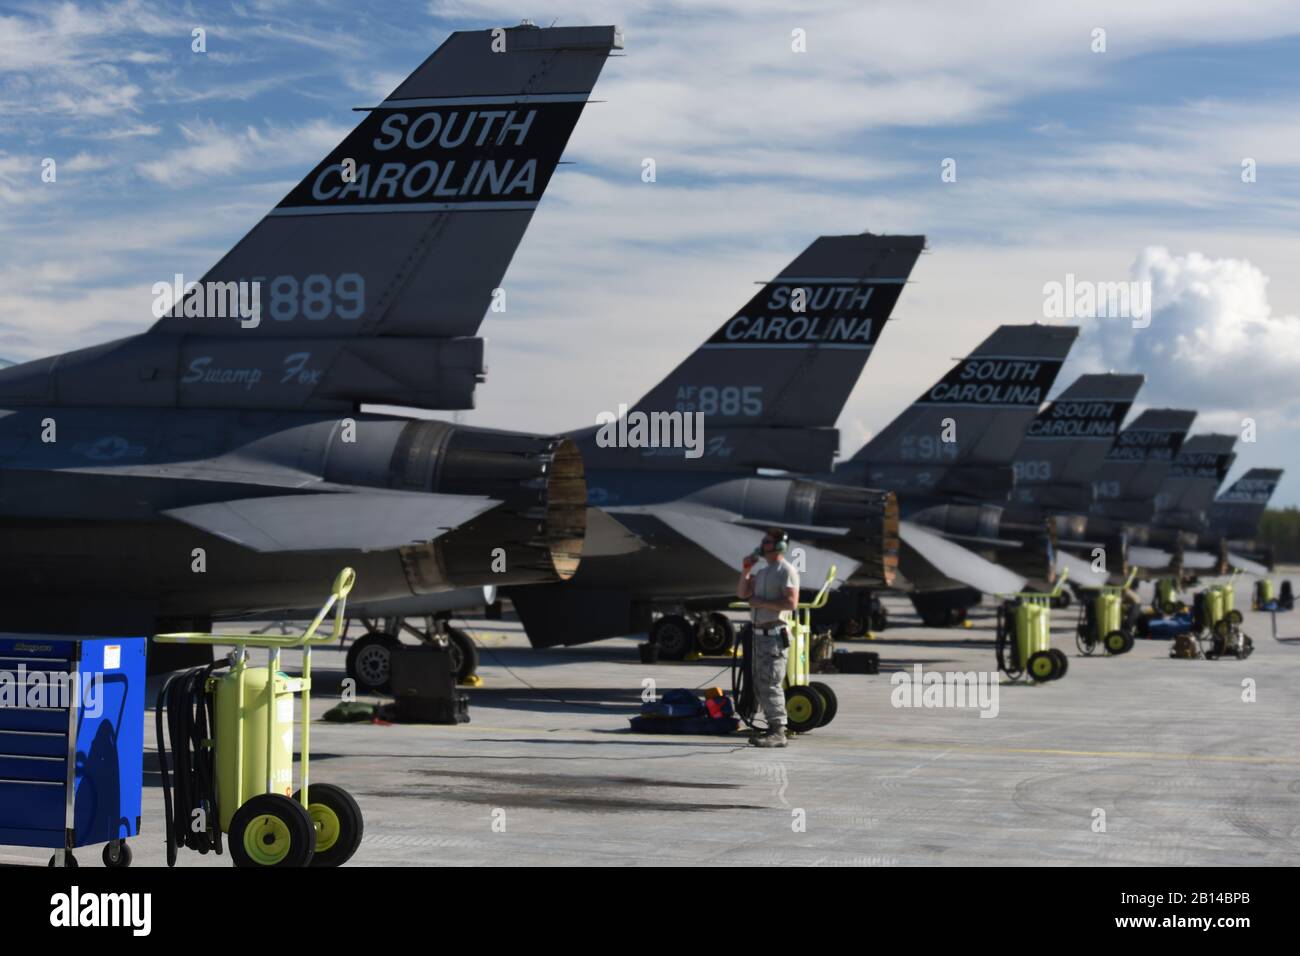 U.S. Air Force F-16 maintainers and pilots assigned to the Air National Guard’s 169th Fighter Wing from McEntire Joint National Guard Base, S.C., begin morning aircraft launch operations during week two in support of Arctic Challenge Exercise 2019 at Kallax Air Base, Luleå, Sweden, May 27, 2019. ACE 19 is a Nordic aviation exercise that provides realistic, scenario-based training to prepare forces for enemy defensive systems. U.S. forces are engaged, postured and ready to deter and defend in an increasingly complex security environment. (U.S. Air National Guard photo by Senior Master Sgt. Edwa Stock Photo